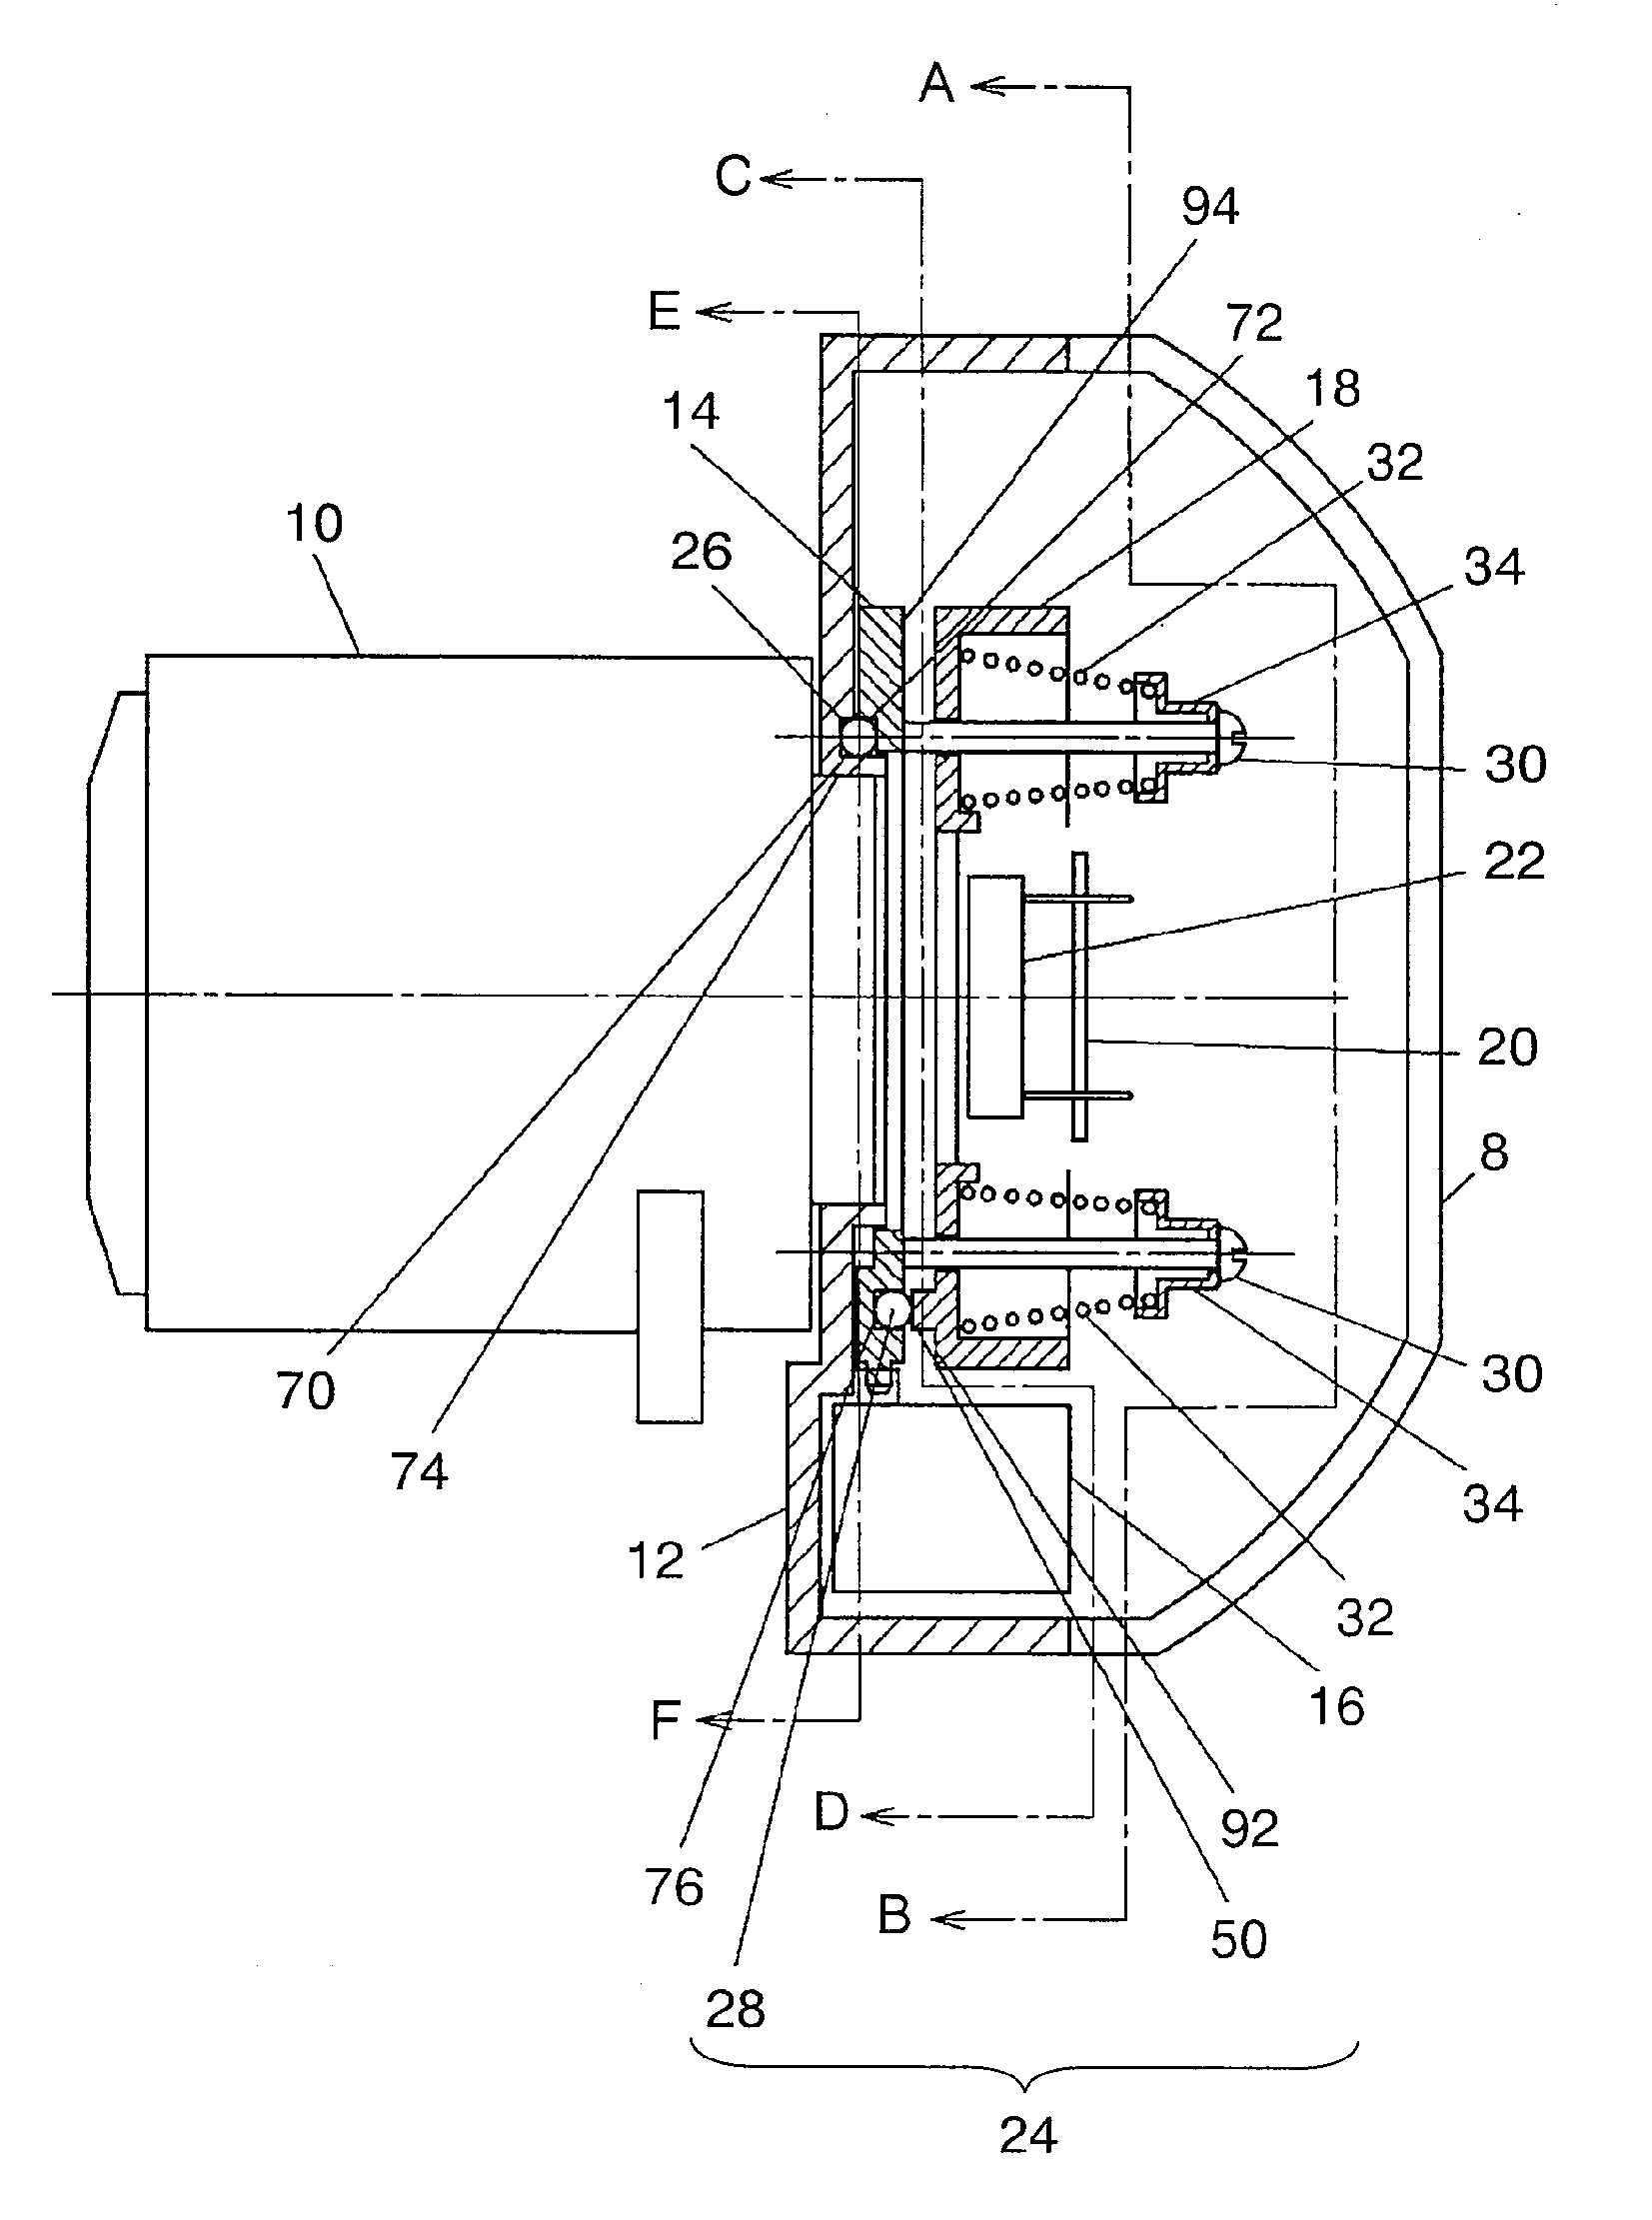 Imaging device driver and photography instrument employing it